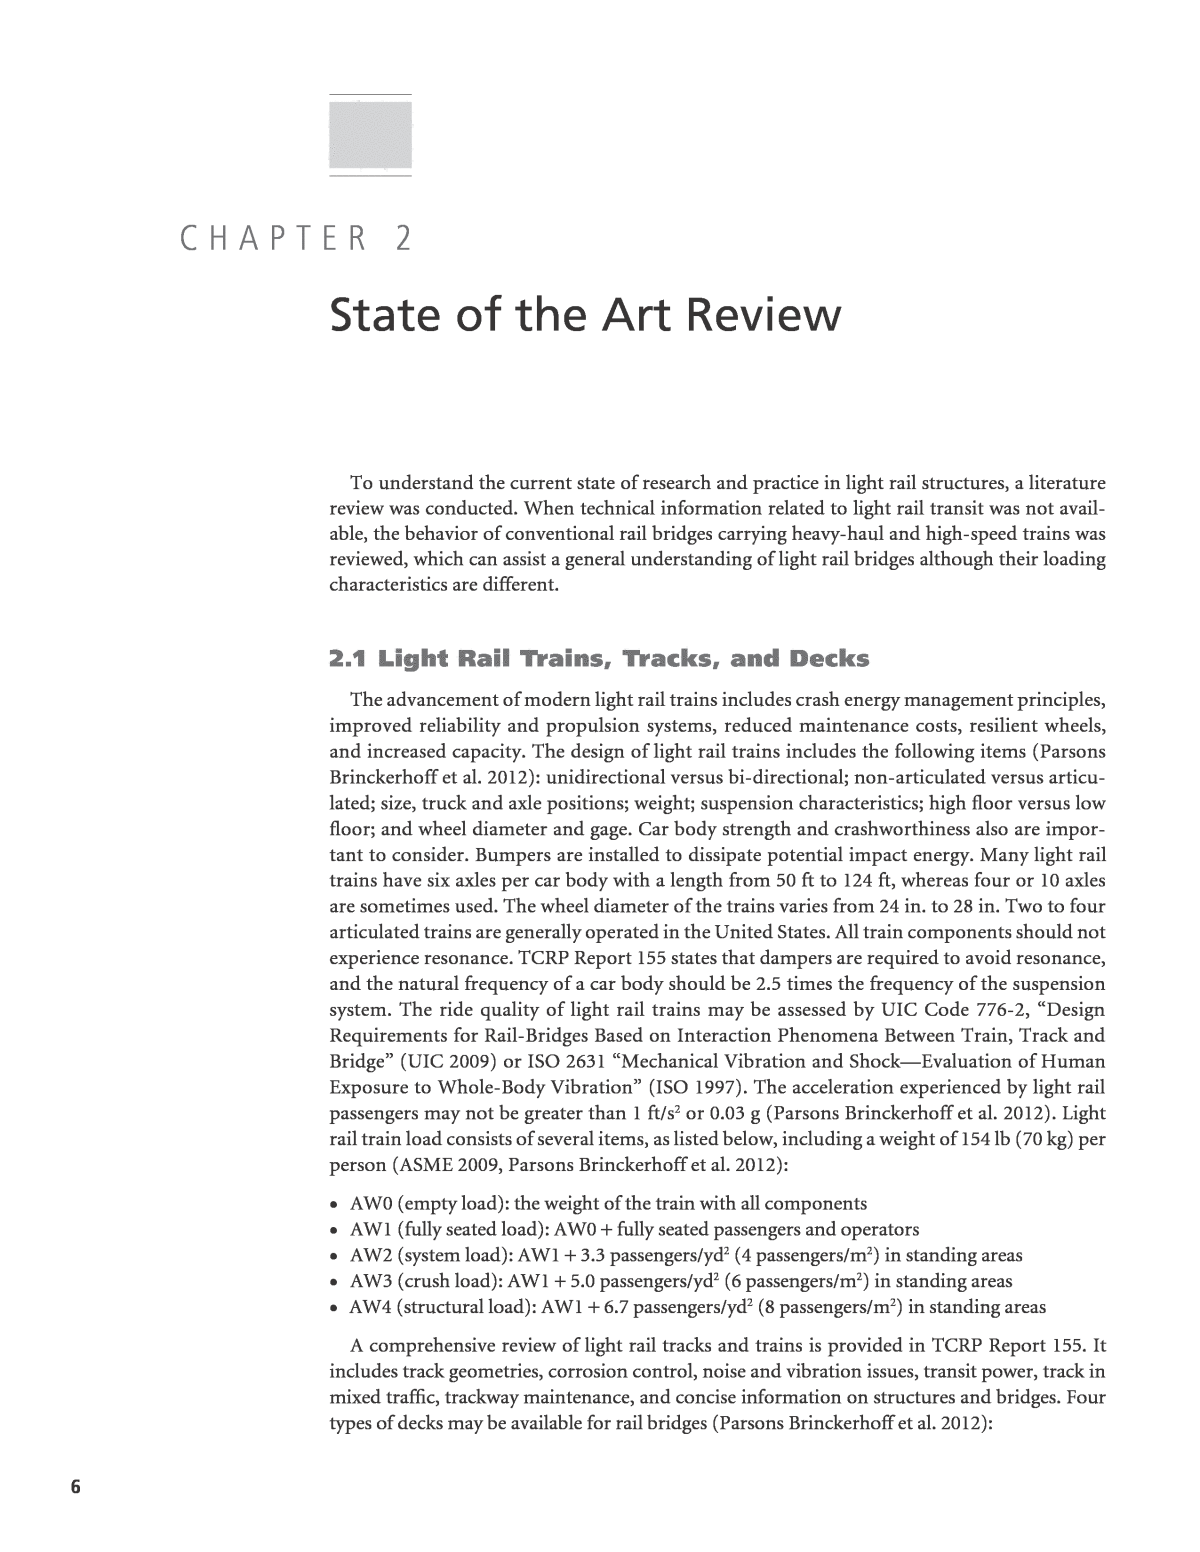 Chapter 2 - State of the Art Review | Proposed AASHTO LRFD ...